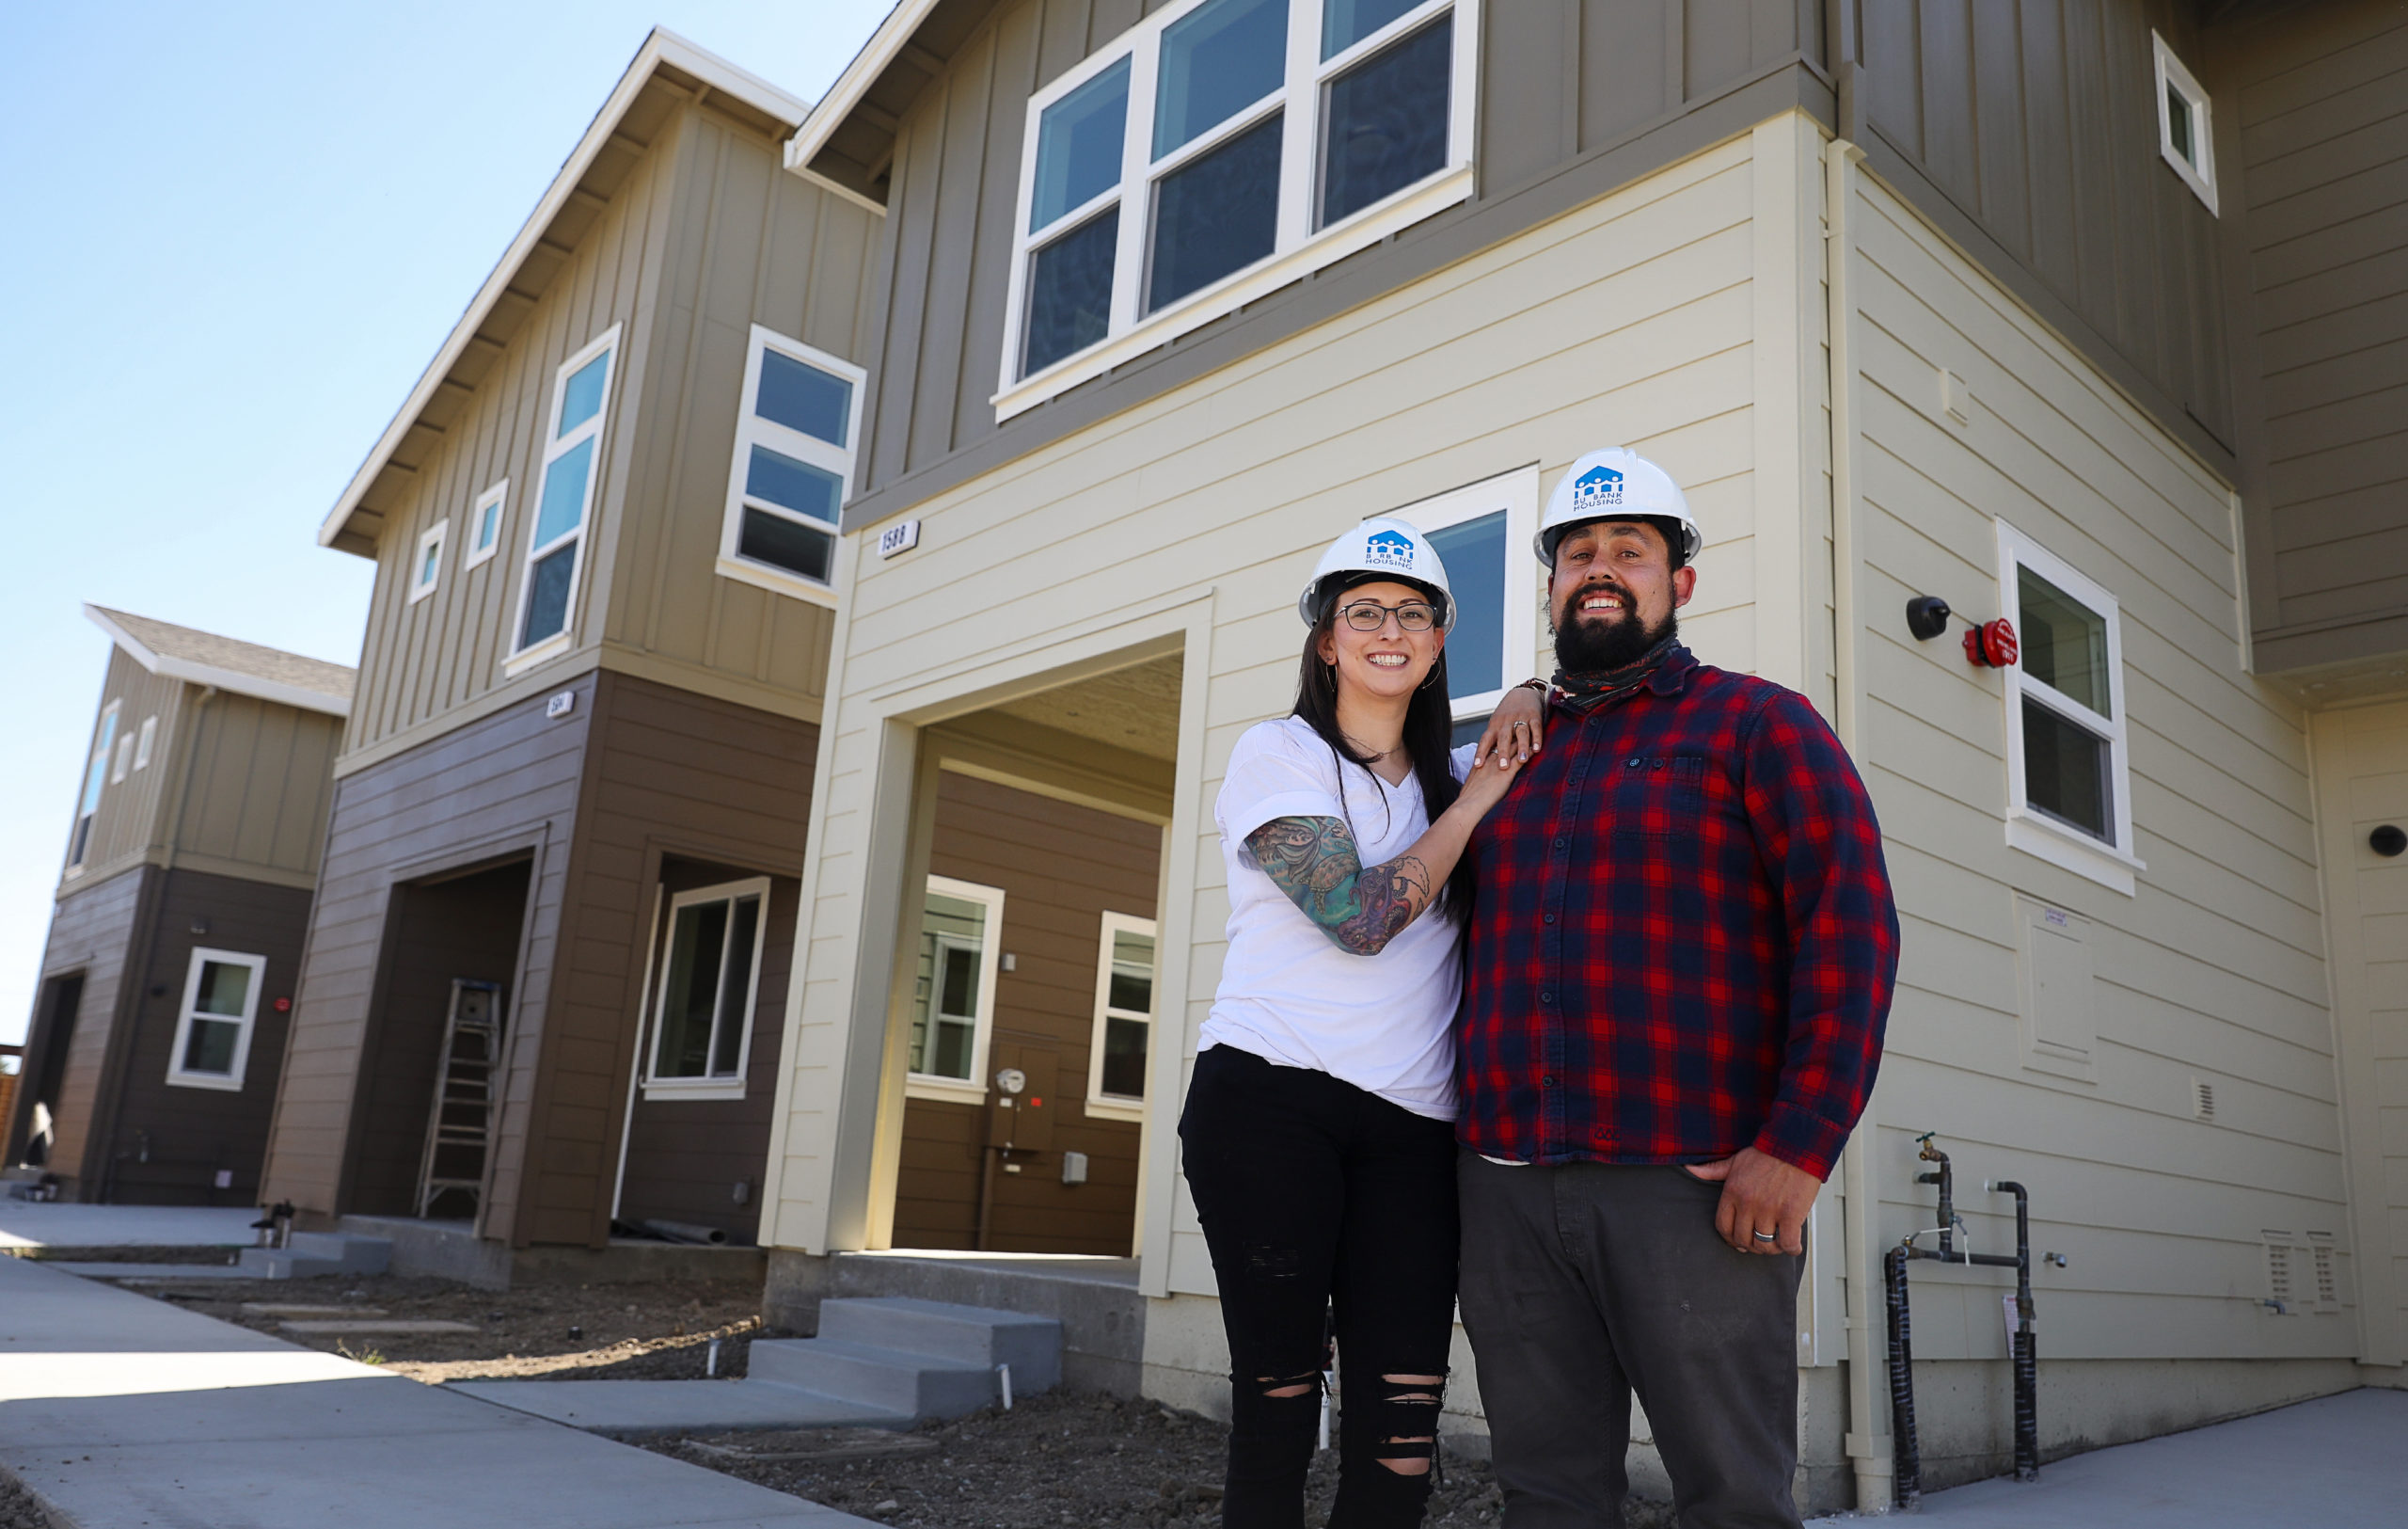 Stephanie and Greg Basurto were able to purchase a duet style single family home in the Lantana Homes community by the Burbank Housing Development Corporation in Santa Rosa. (Christopher Chung/The Press Democrat)